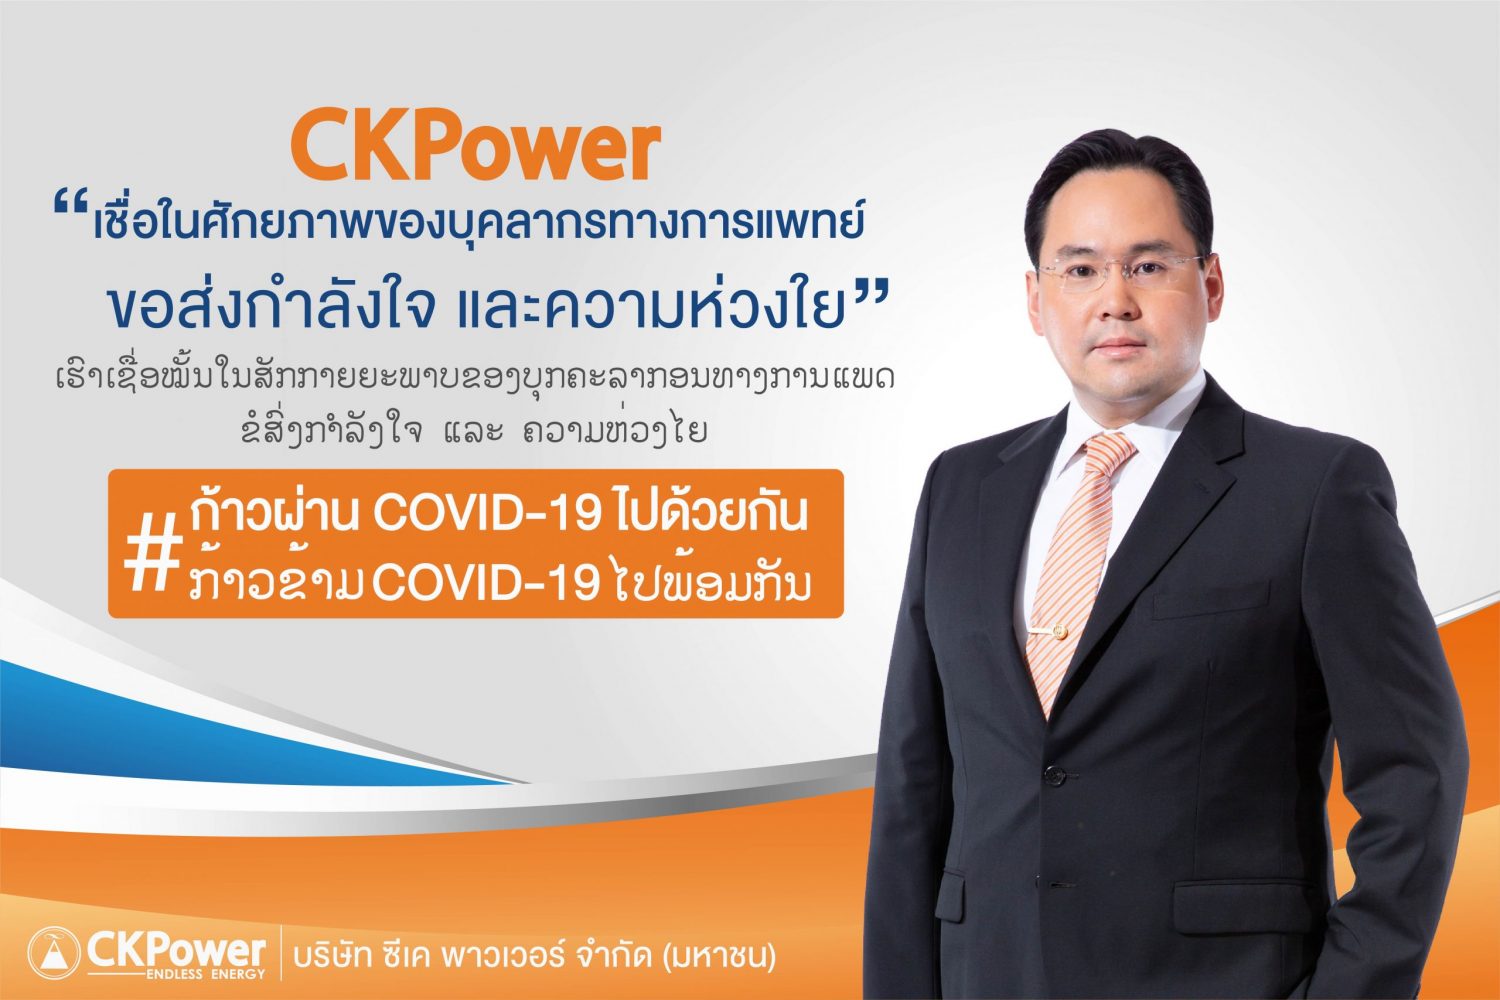 CKPower Group Makes Donations to Ramathibodi Foundation and the Lao PDR to Support the fight against COVID-19